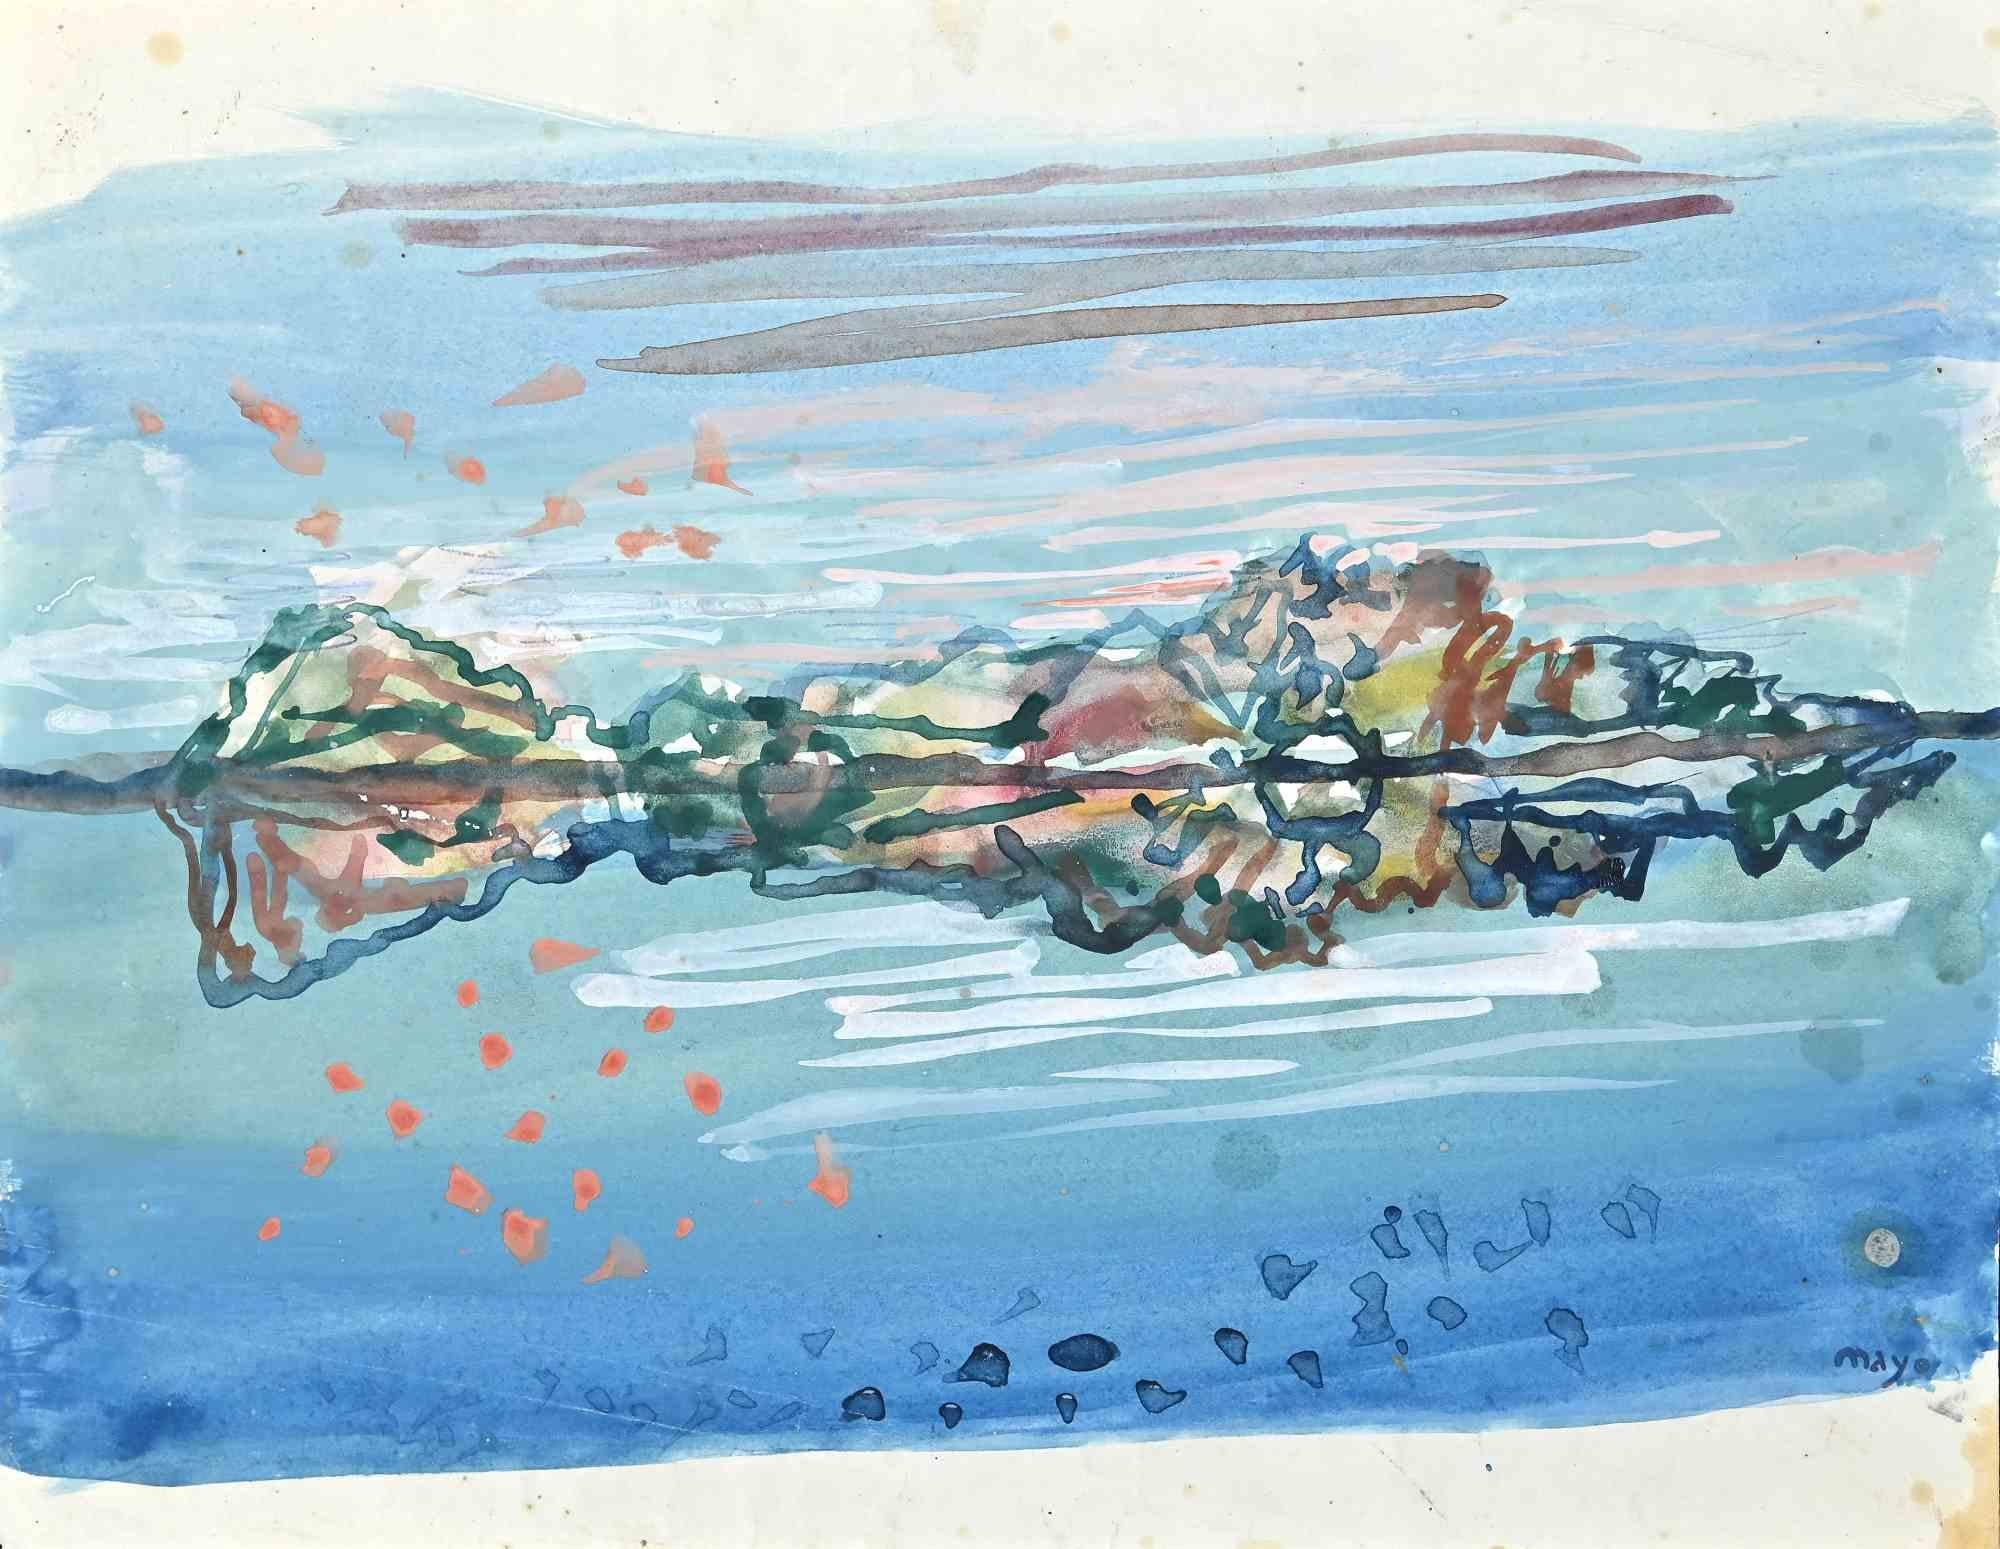 Seascape is an original drawing in watercolor on paper, realized by the artist Antoine Mayo (1905-1990) in the 1950s.

Hand-Signed on the lower right margin

In good condition.

Antoine Mayo  (Port Said, Egypt 1905 - Seine Port1990). Greek painter